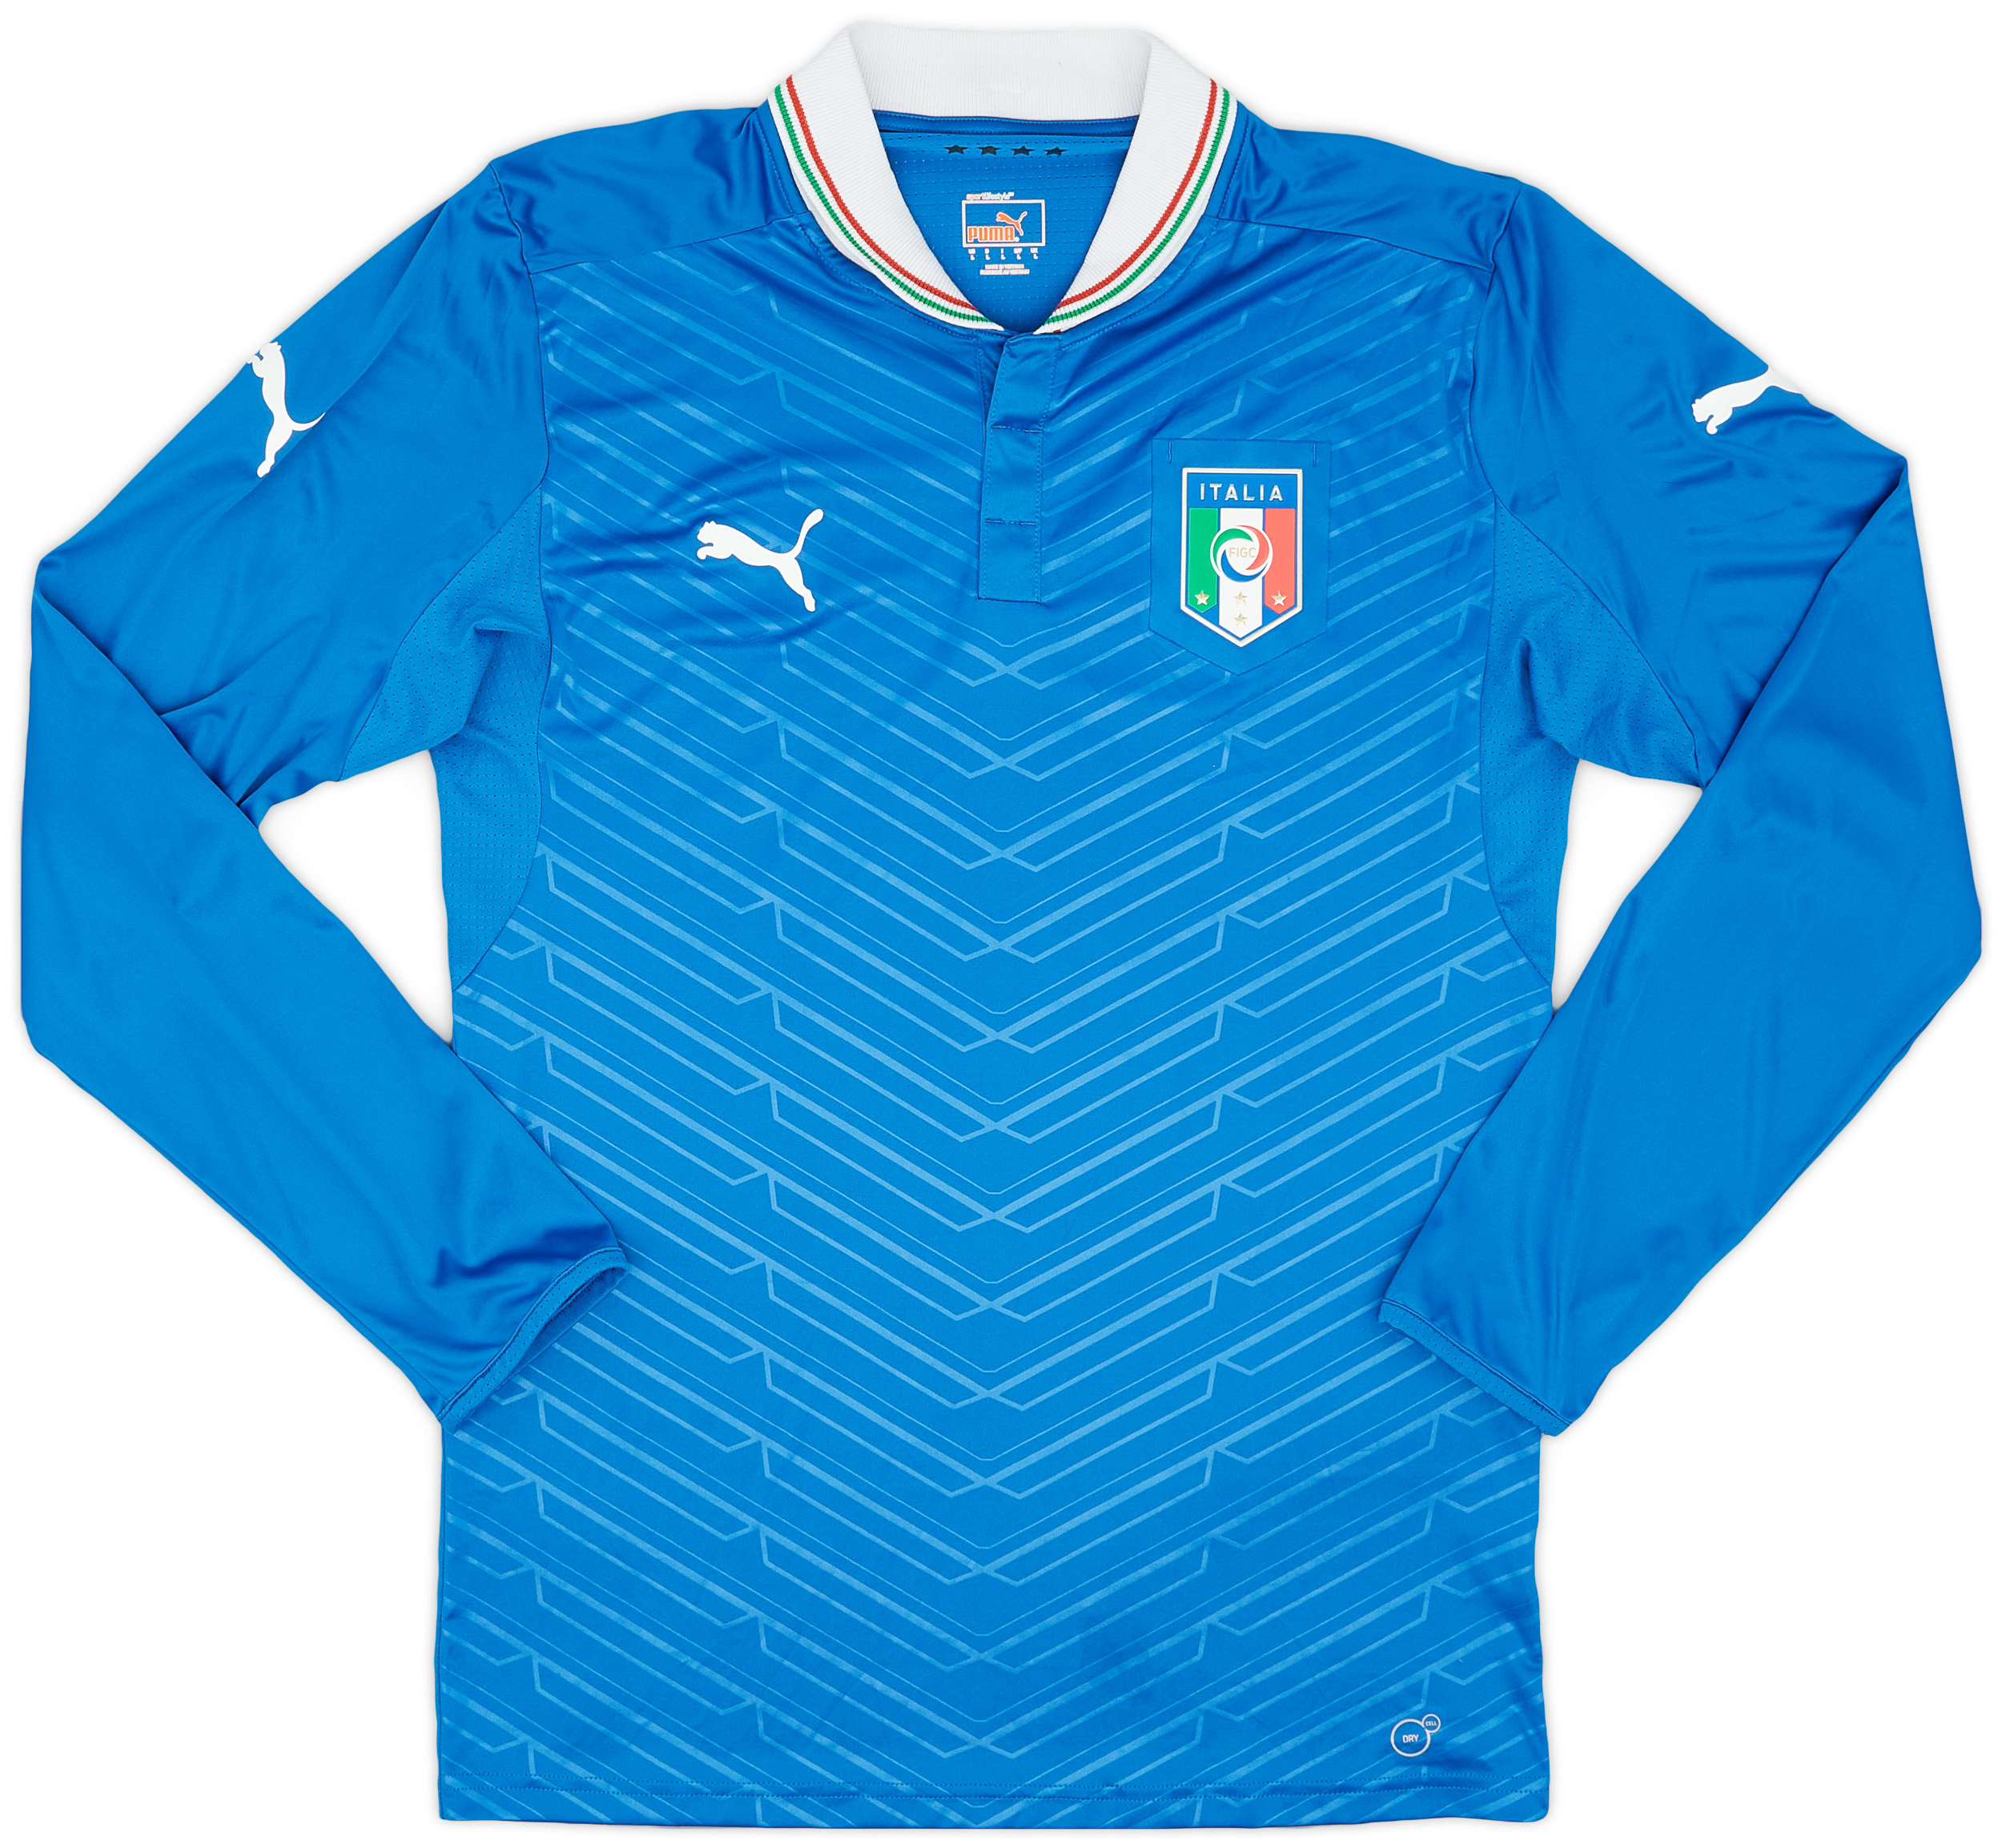 2012-13 Italy Player Issue Home Shirt - 9/10 - ()